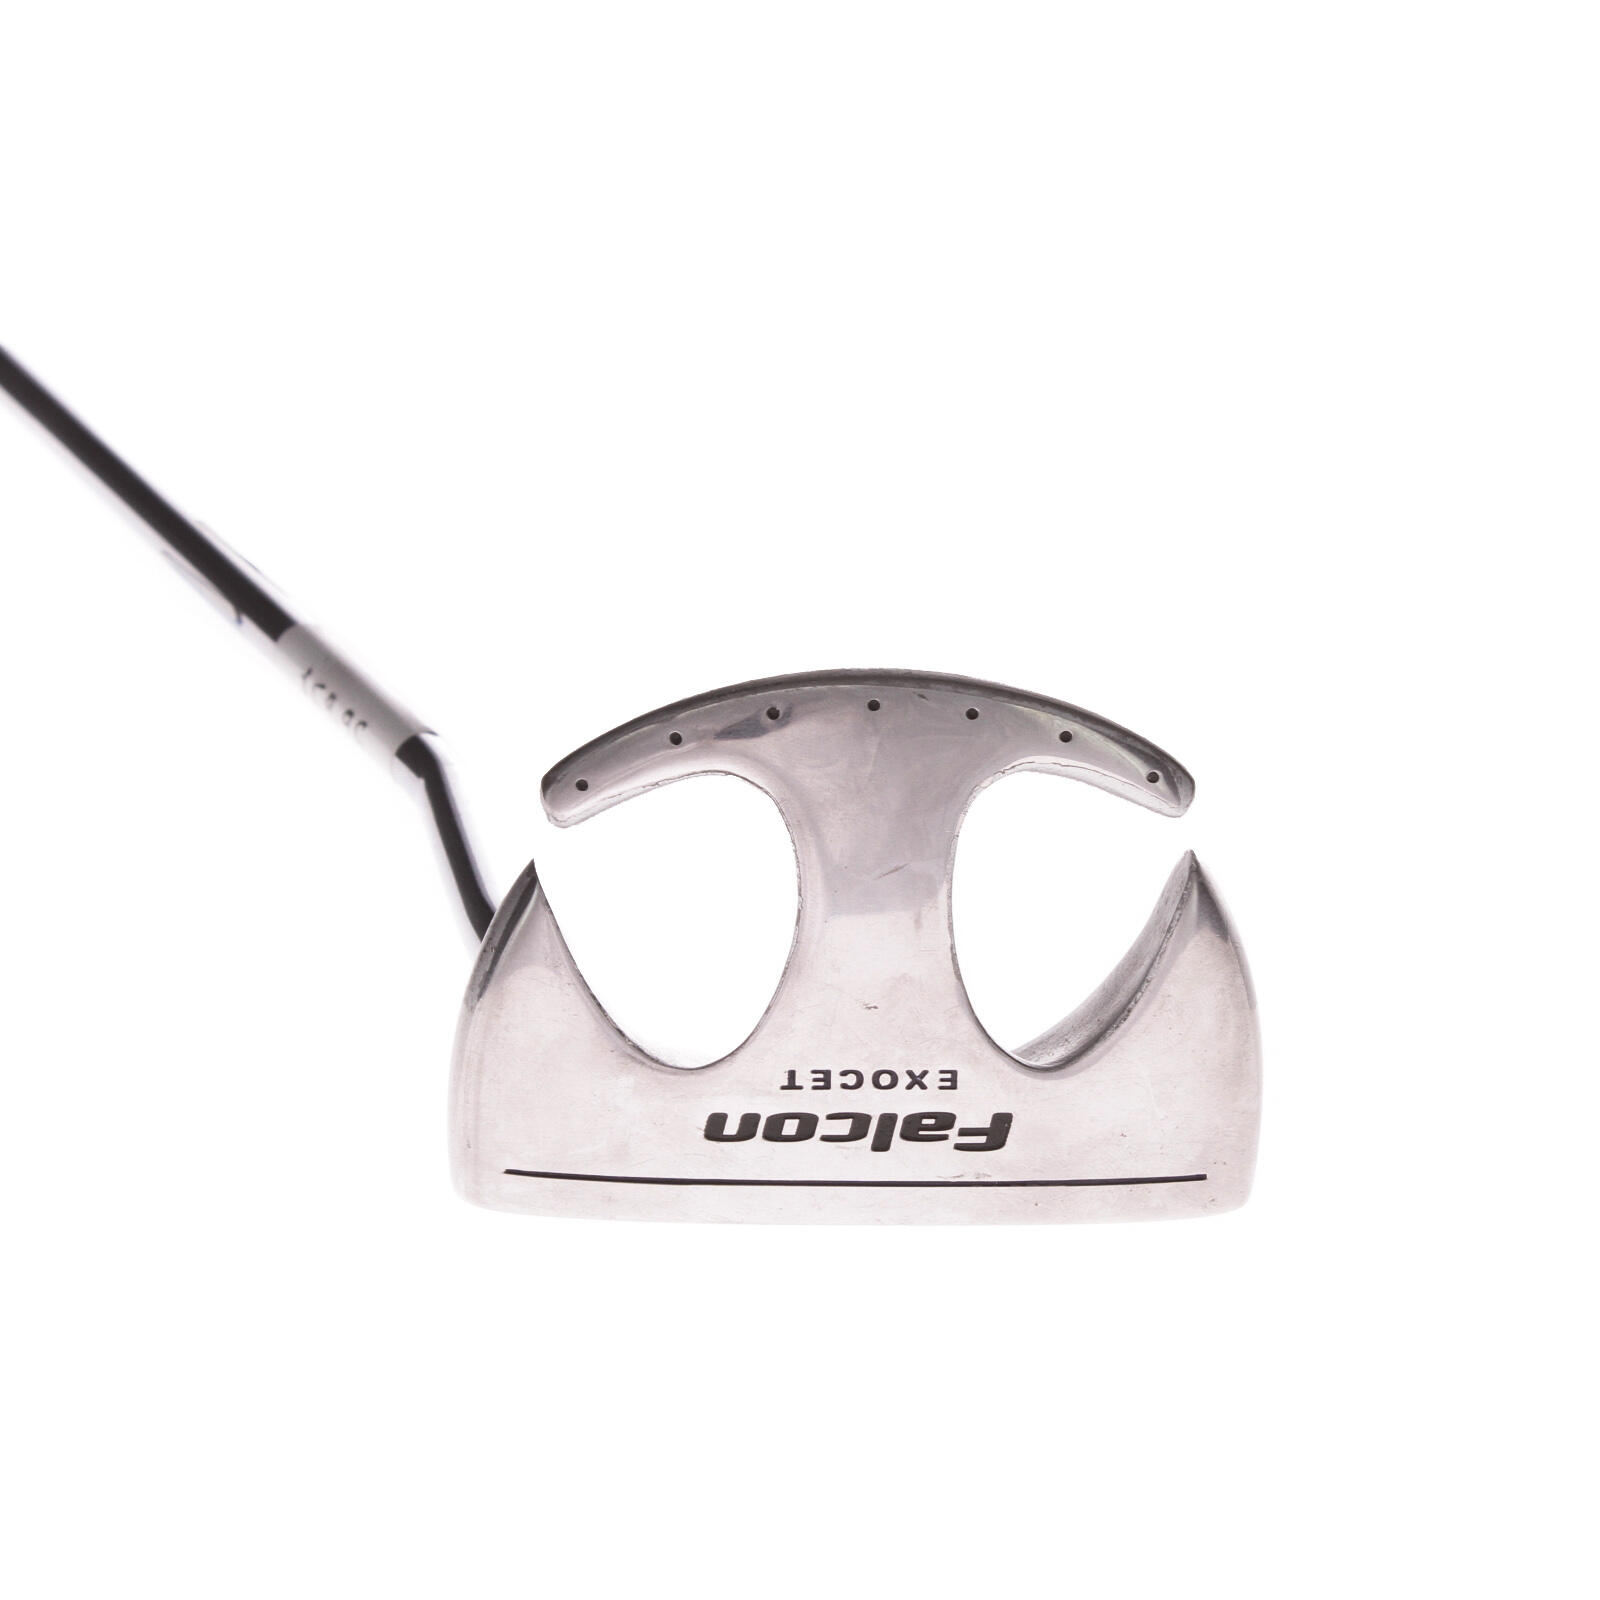 FALCON USED - Falcon Exocet Putter 34 Inches Length Steel Shaft Right Handed - GRADE B